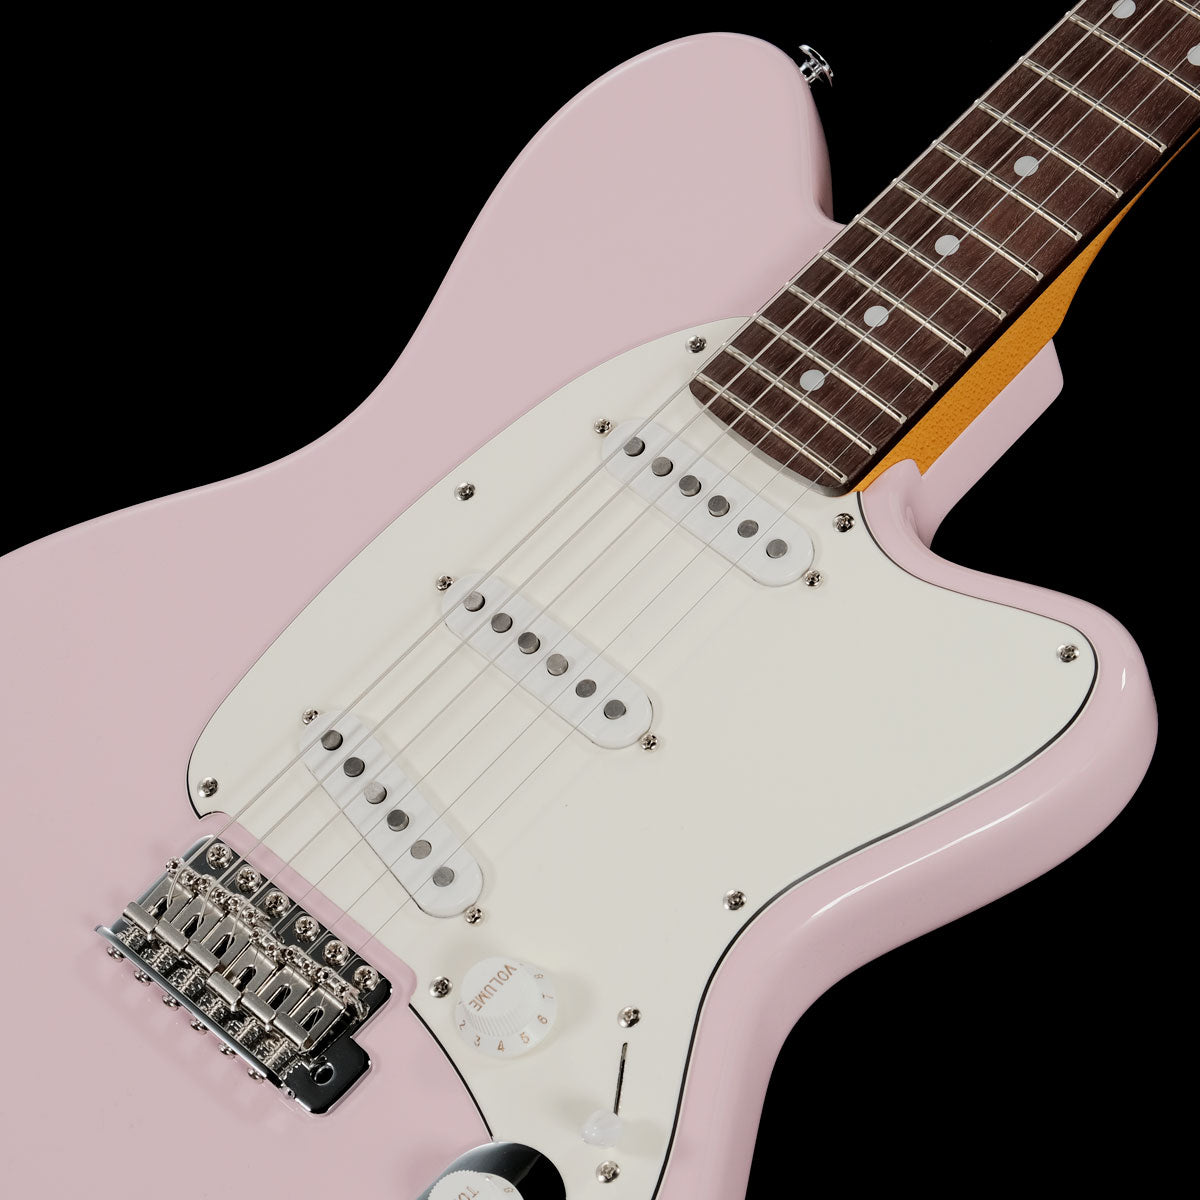 [SN F2415371] Ibanez / J-LINE Talman TM730 Pastel Pink [Made in Japan] [Limited Edition] (Weight: 3.47kg) [05]